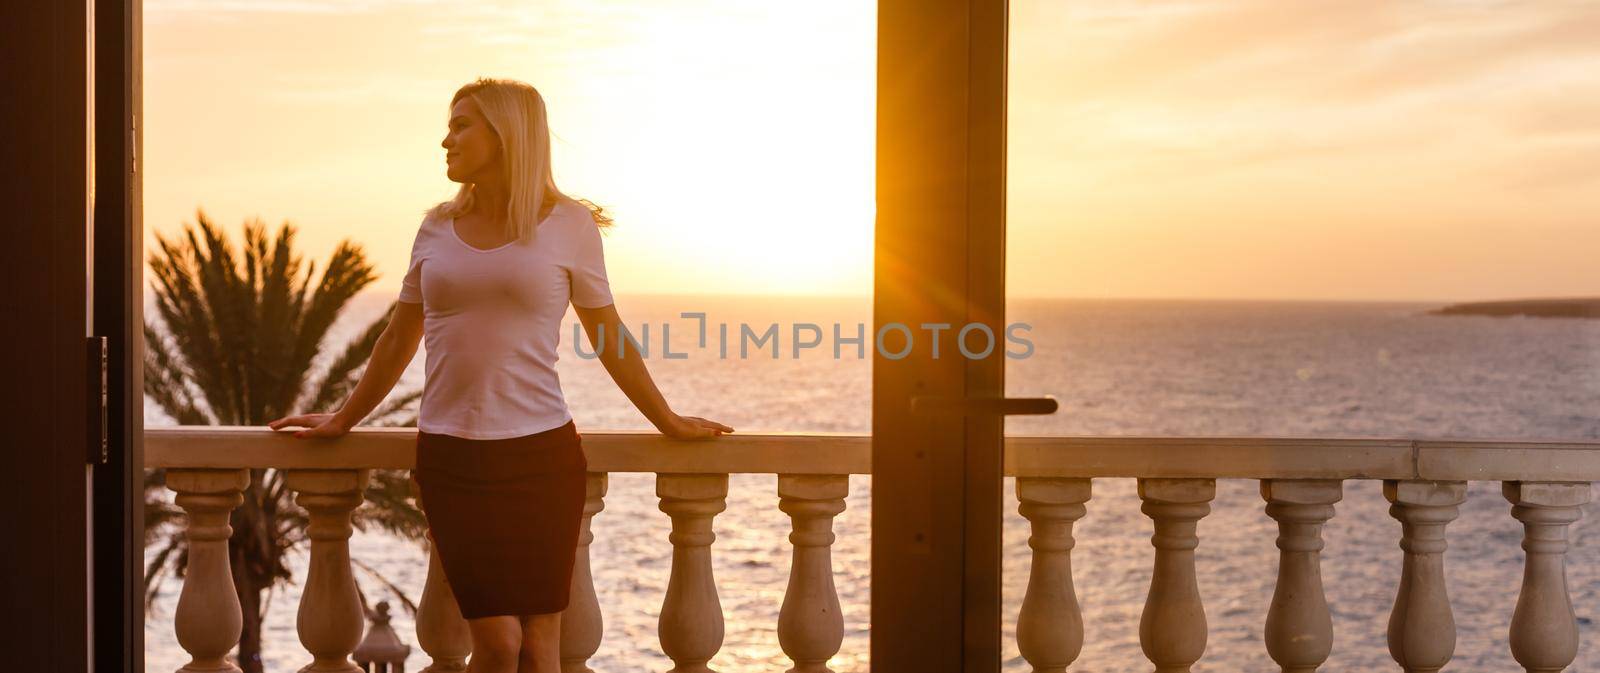 Woman admiring sunset from her balcony by Andelov13